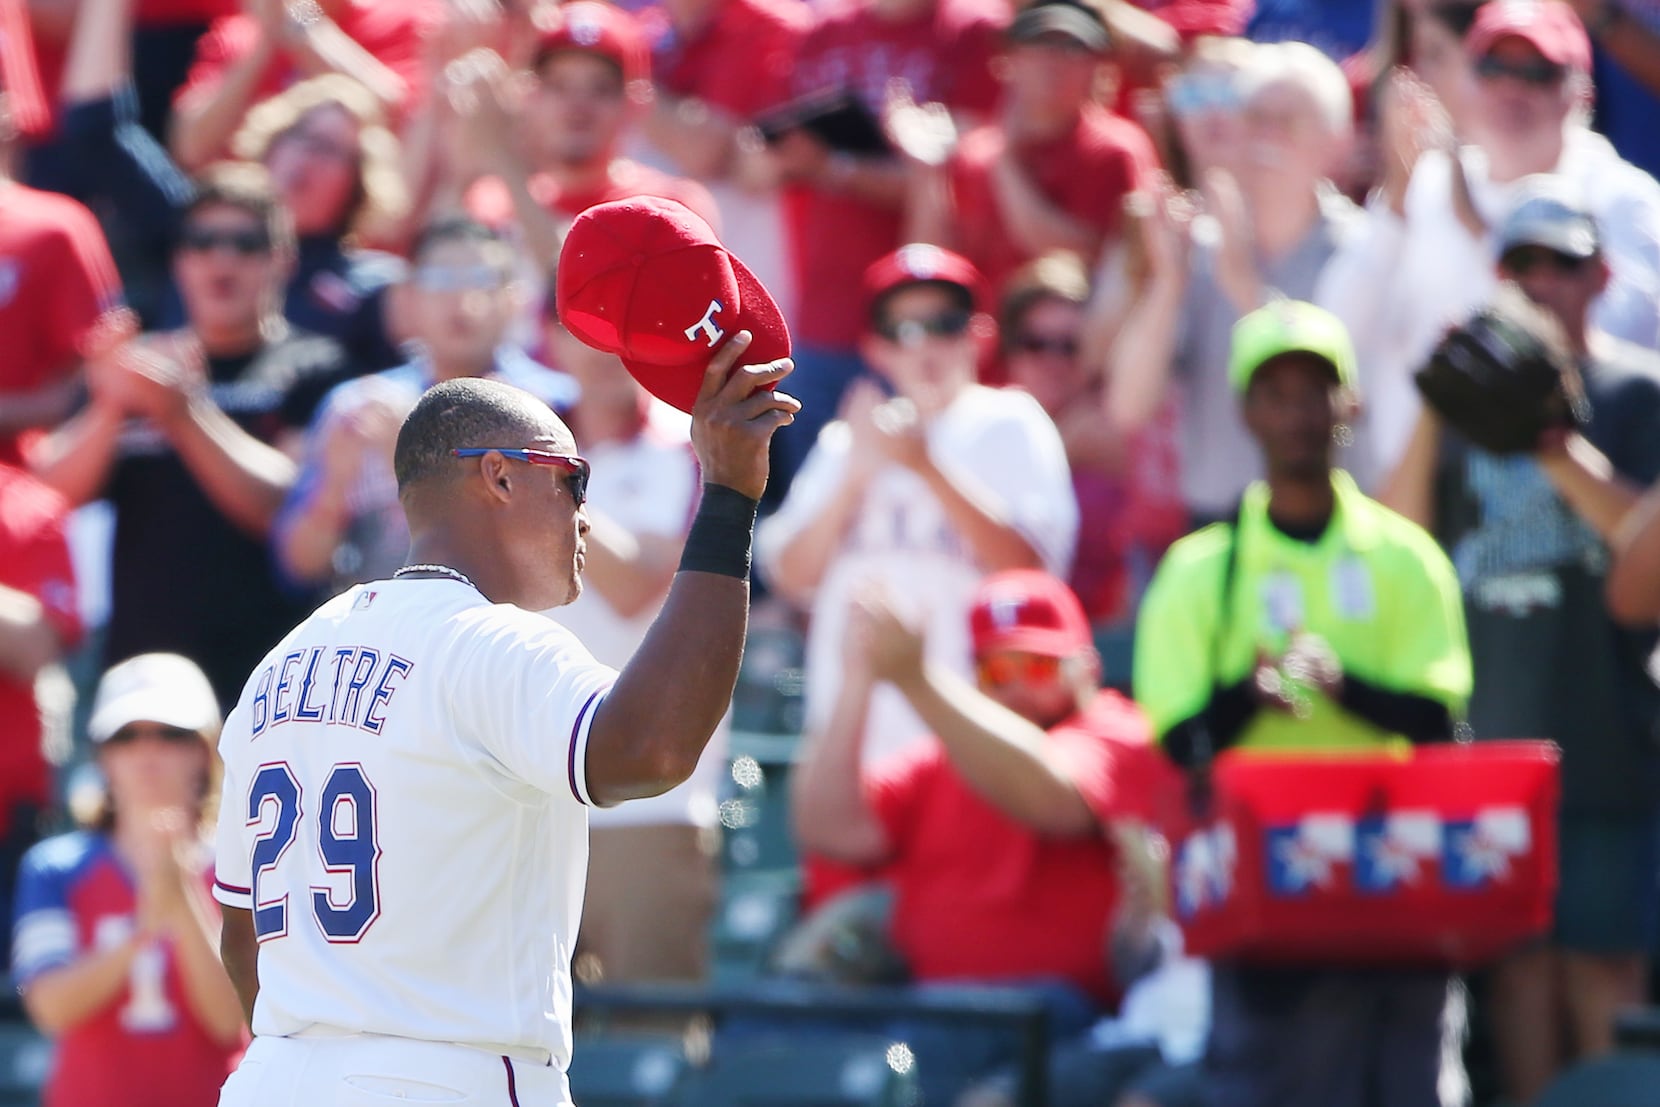 Fast-forwarding seven (or so) years to the Rangers' next Hall of